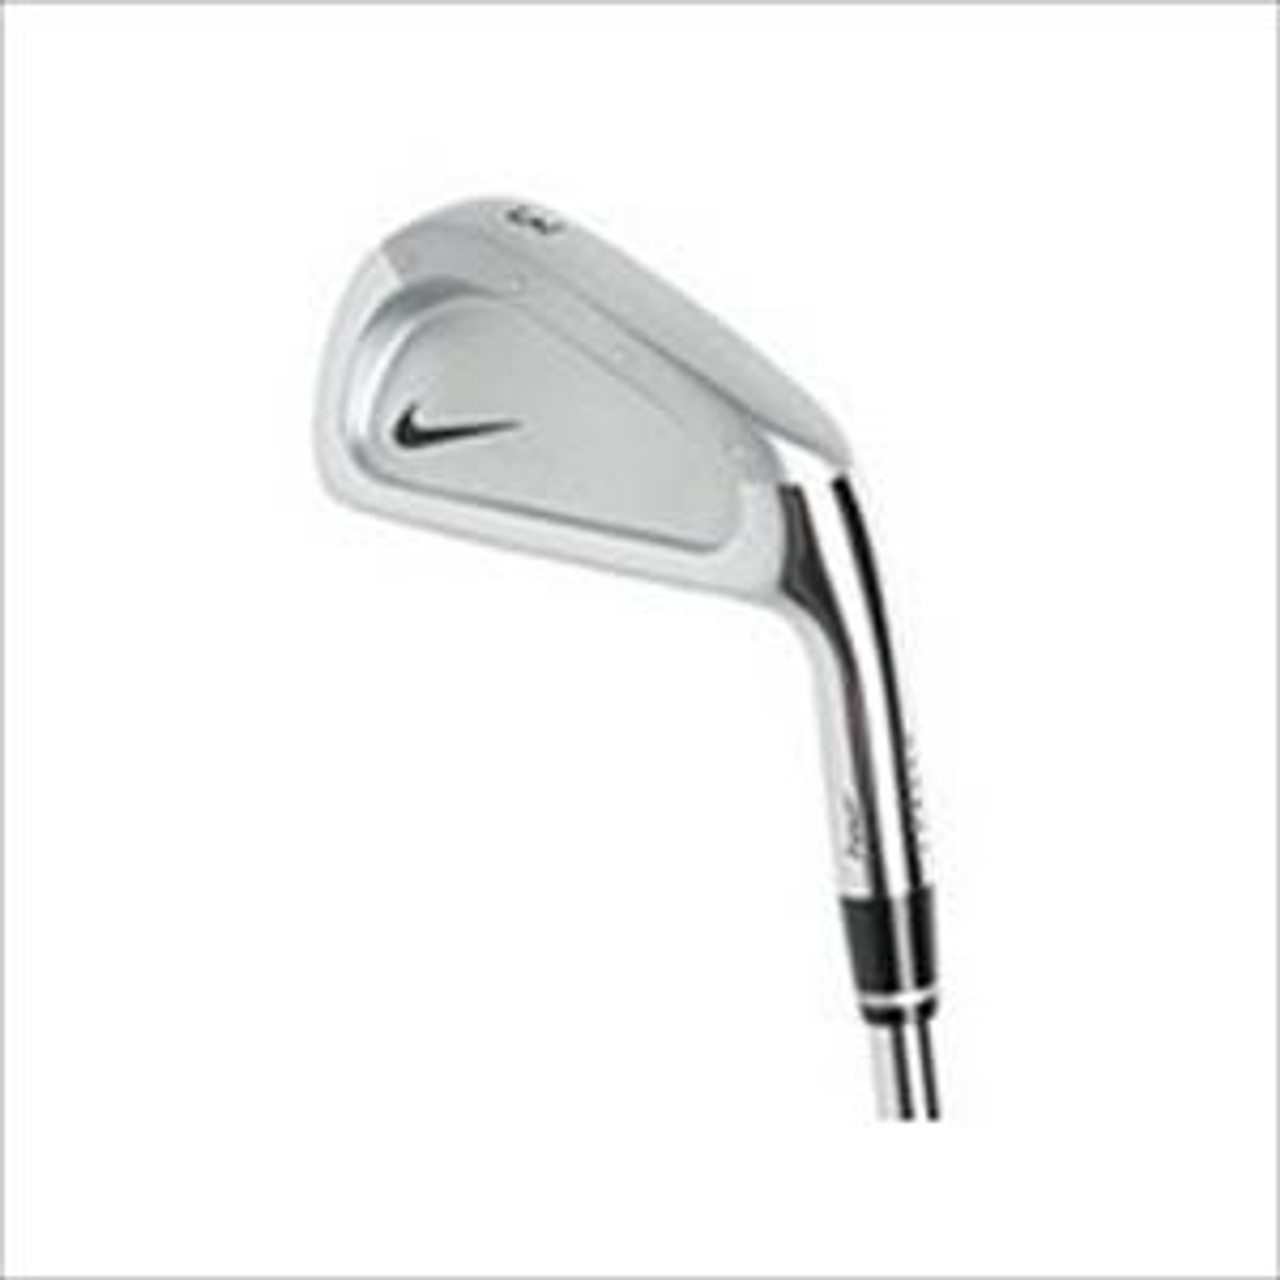 NIKE COMBO TOUR 4 IRON STEEL STIFF RIGHT-HANDED 819374 - Mikes Golf Outlet